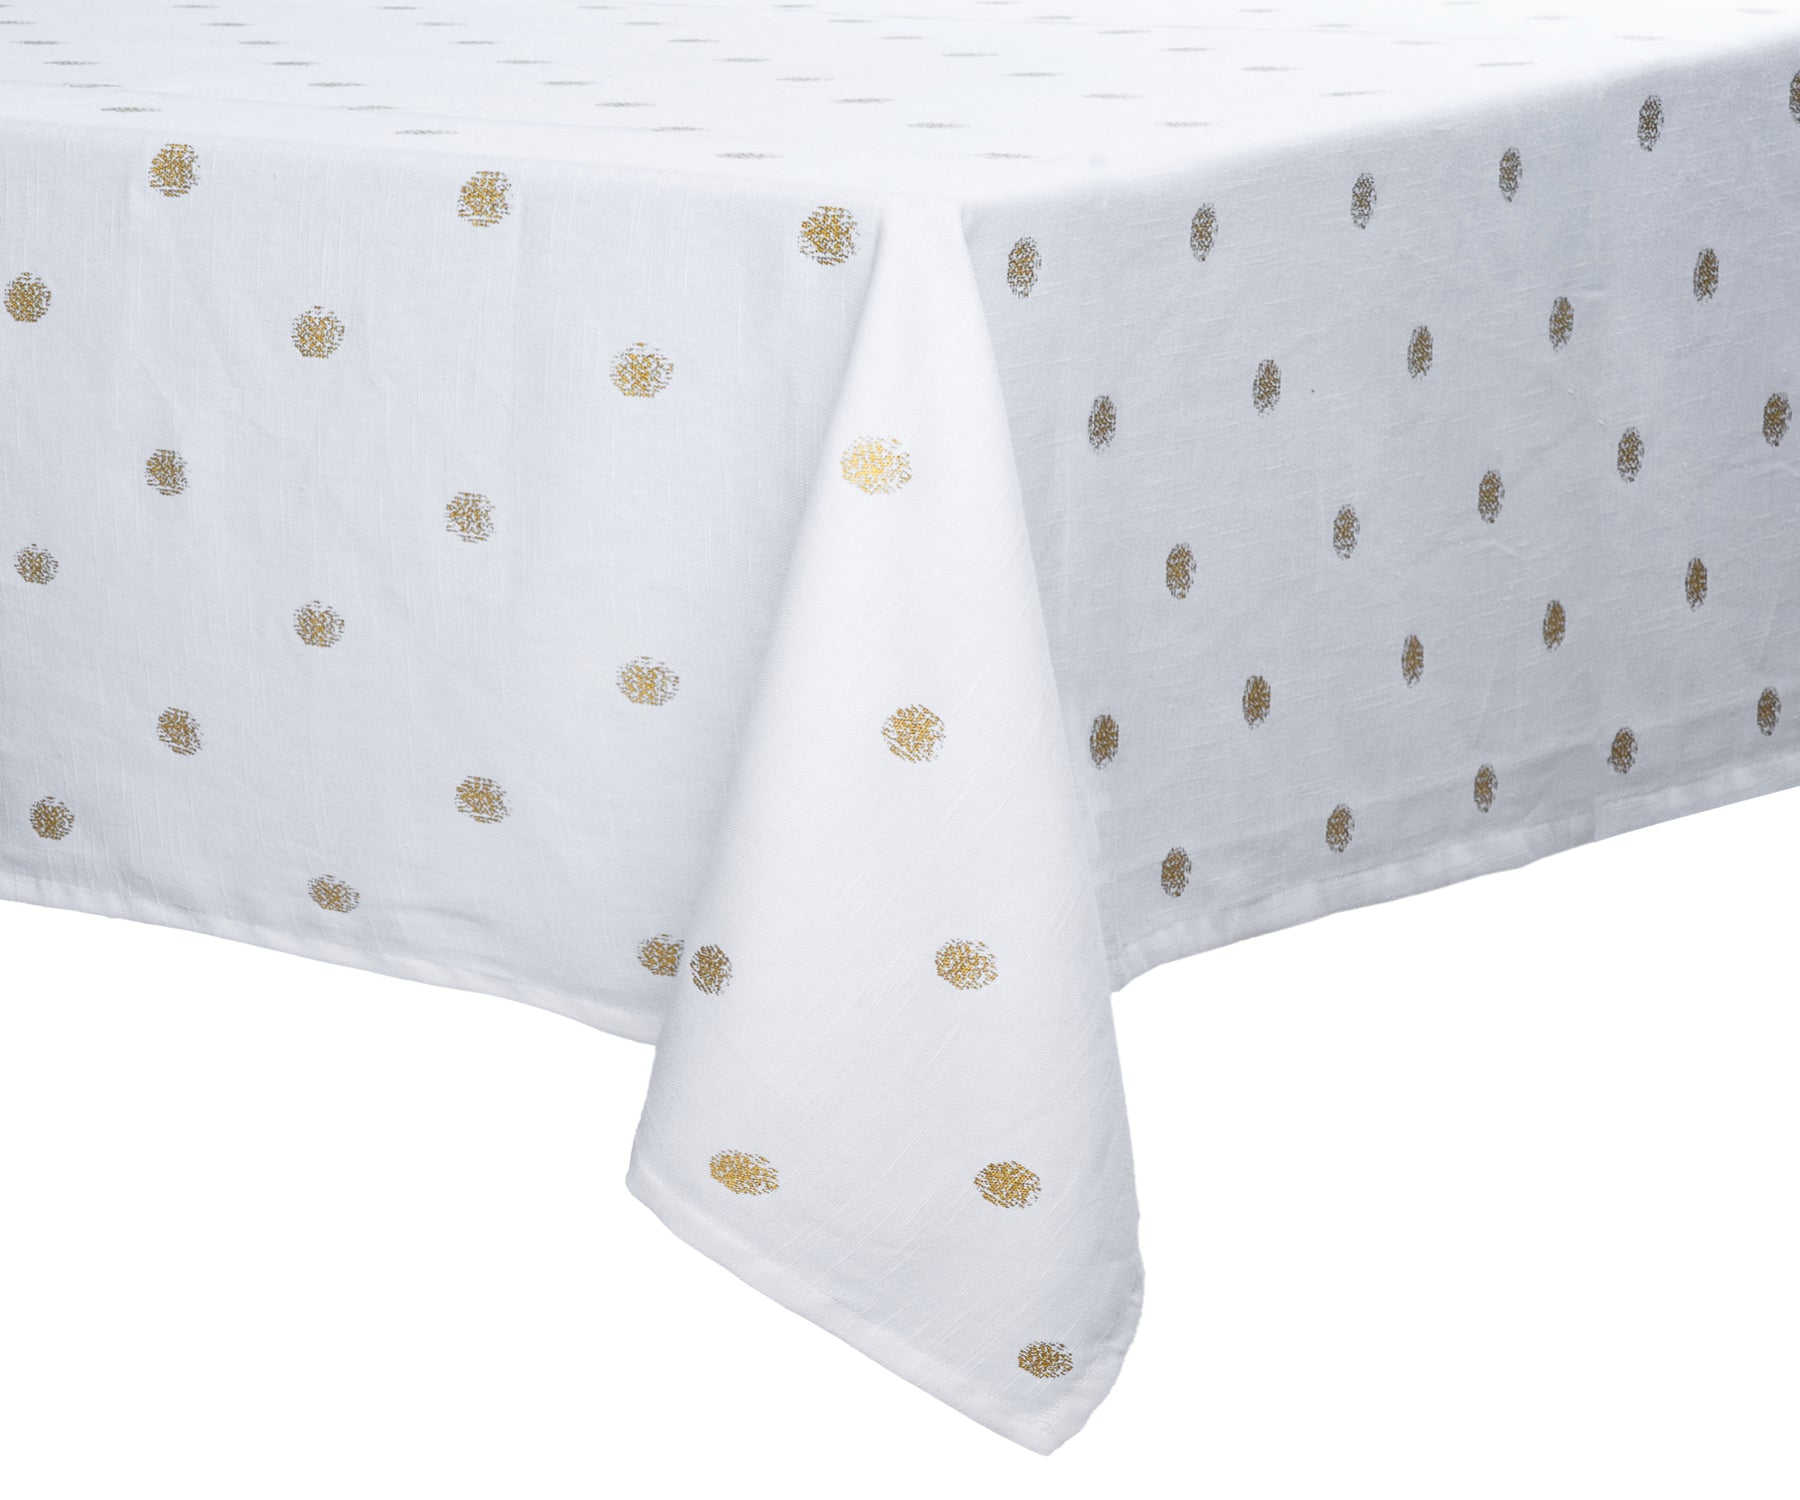 Rectangle cotton tablecloth for any event.